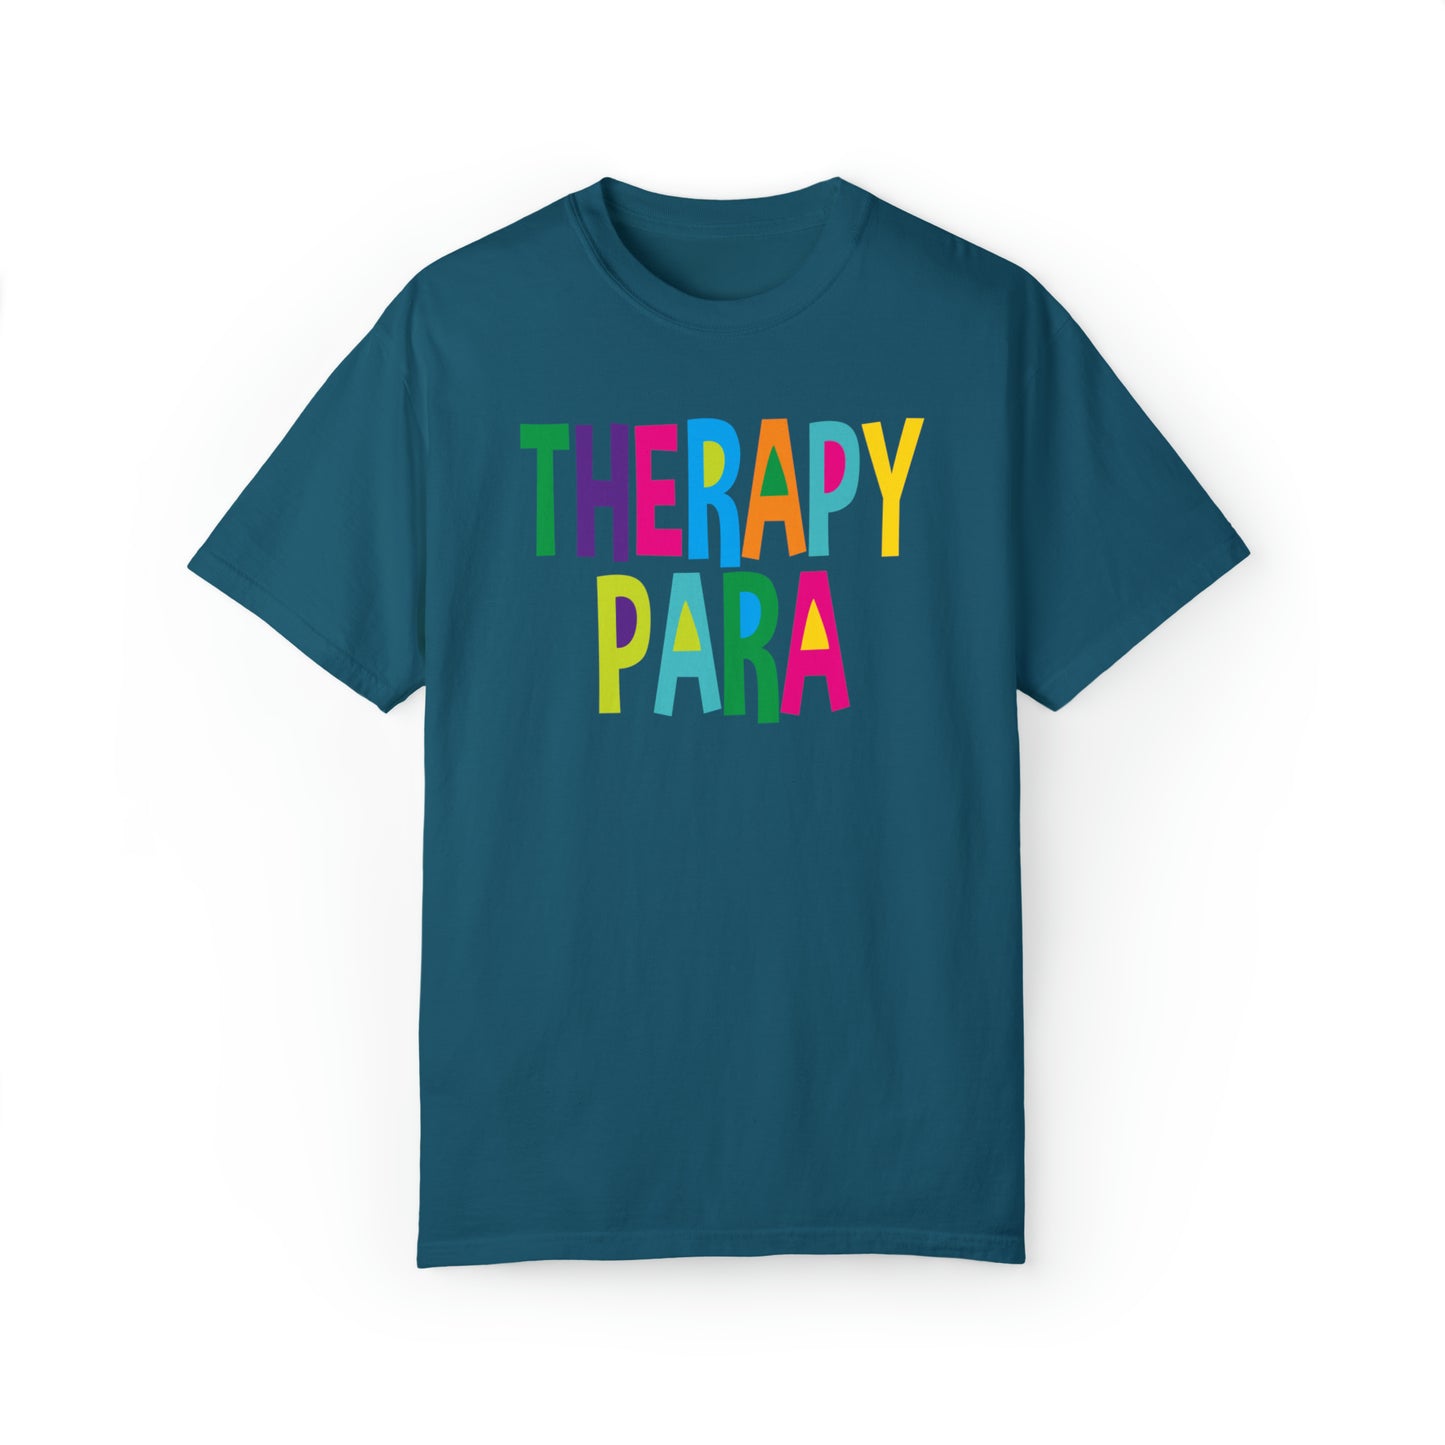 Therapy Para - Comfort Colors 1717 Unisex Garment-Dyed T-shirt